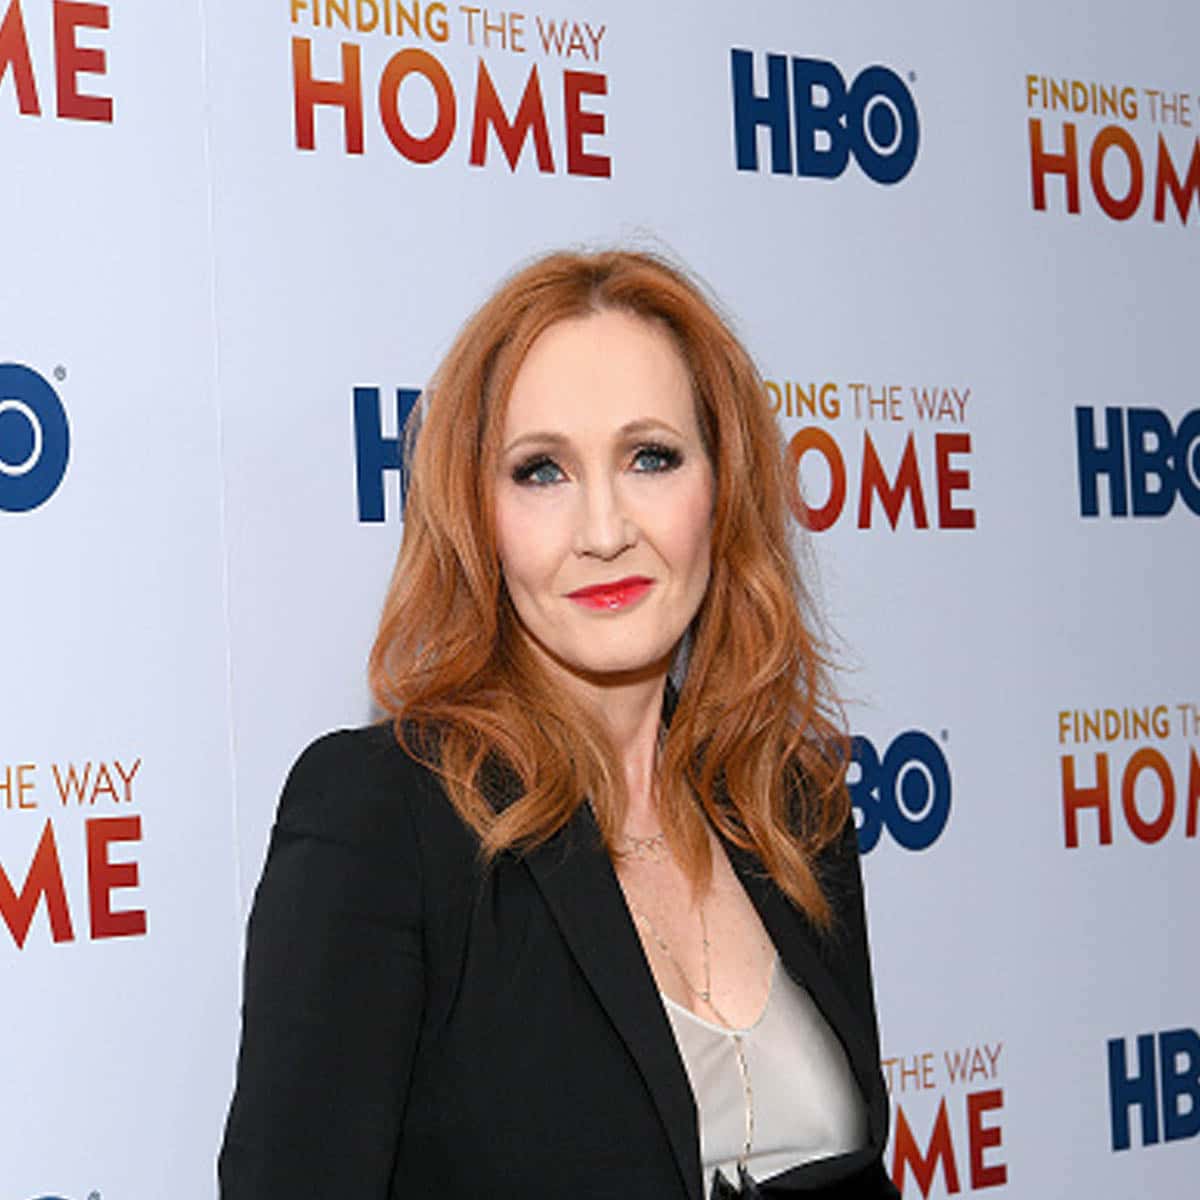 author jk rowling attends hbo's finding the way home premiere